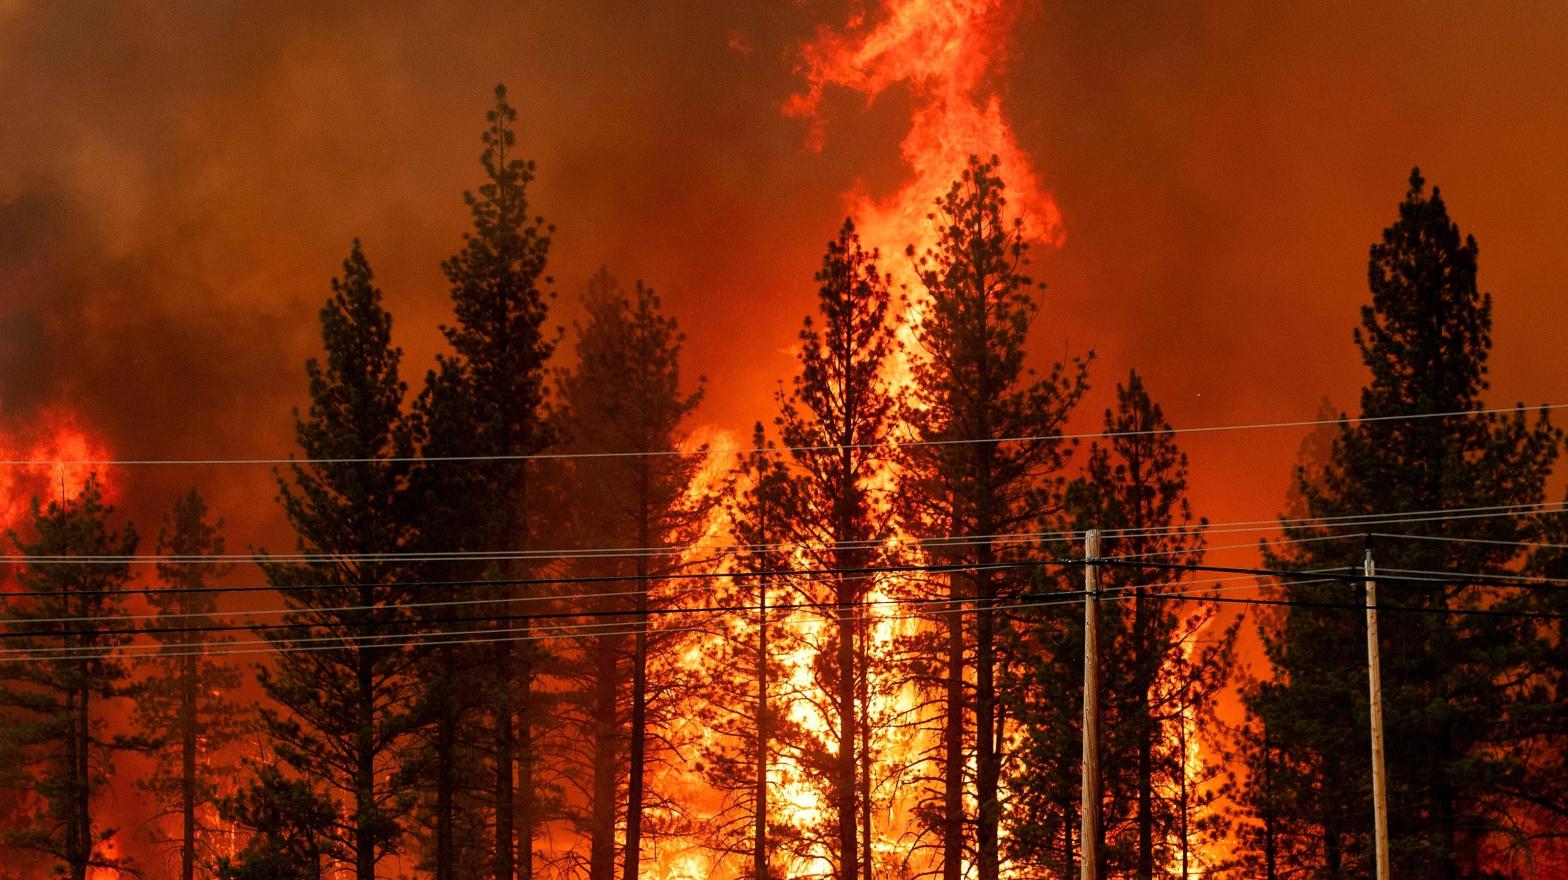 The Hog Fire burns outside of Susanville, California, in July 2020. (Photo: Josh Edelson/AFP, Getty Images)